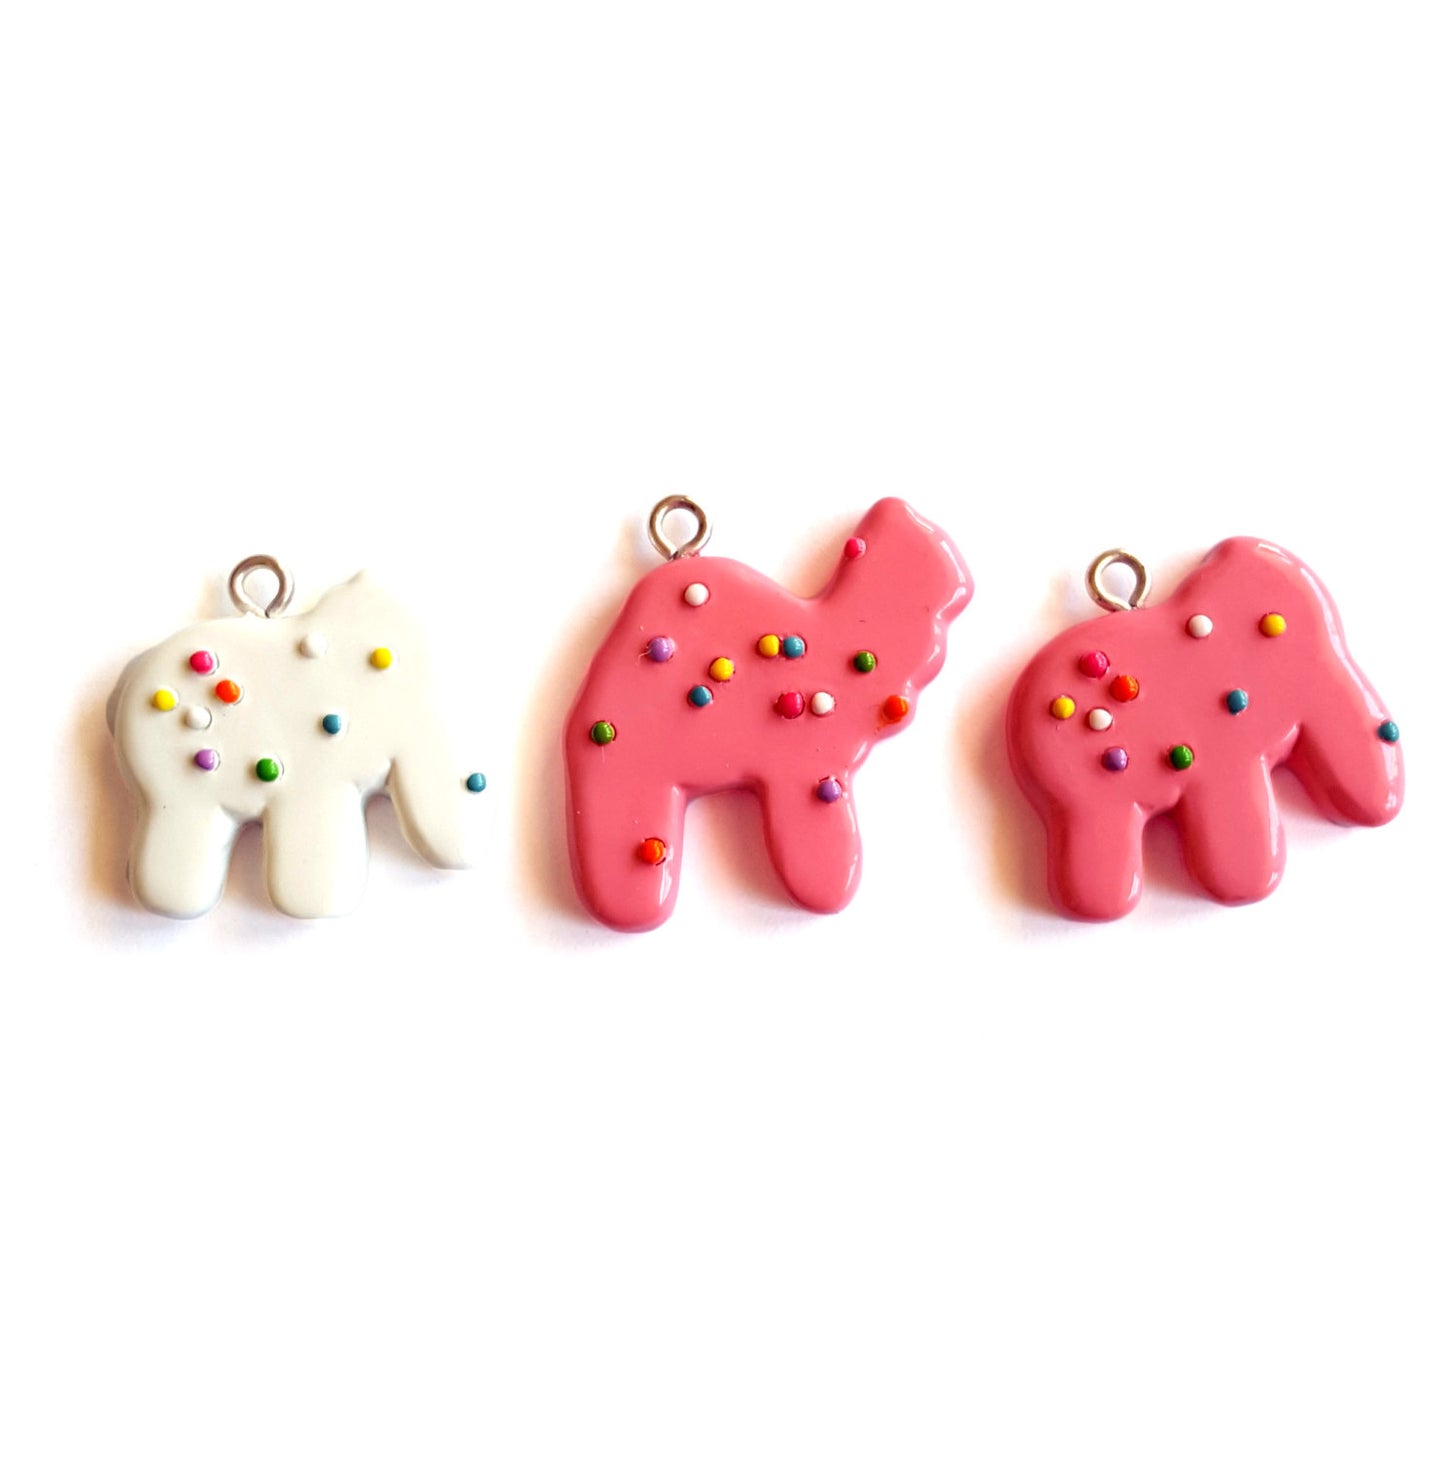 Frosted Animal Cookies Necklace Chain Necklace